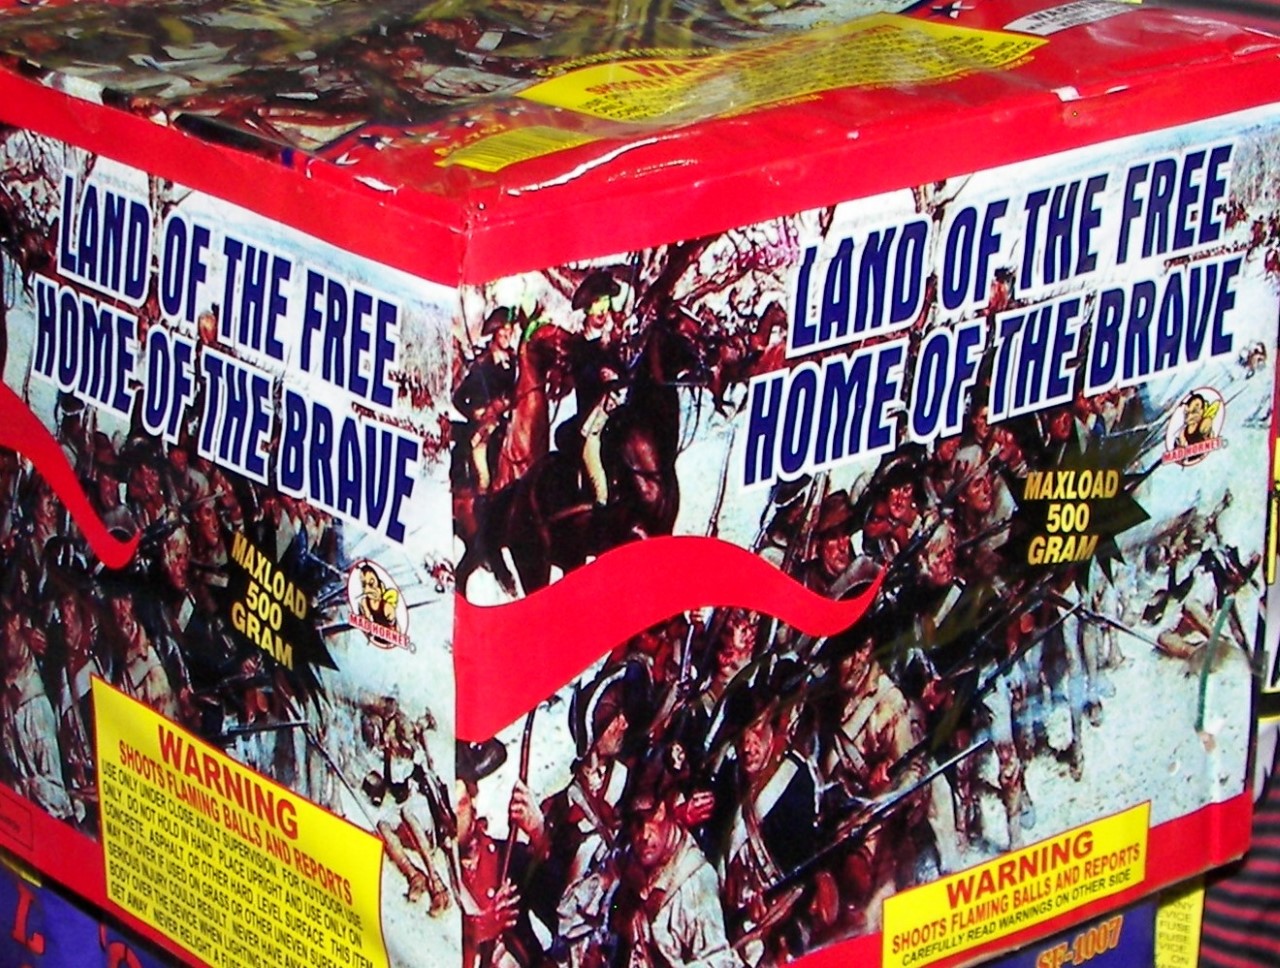 LAND OF THE FREE HOME OF THE BRAVE (A 500 gram load)-image